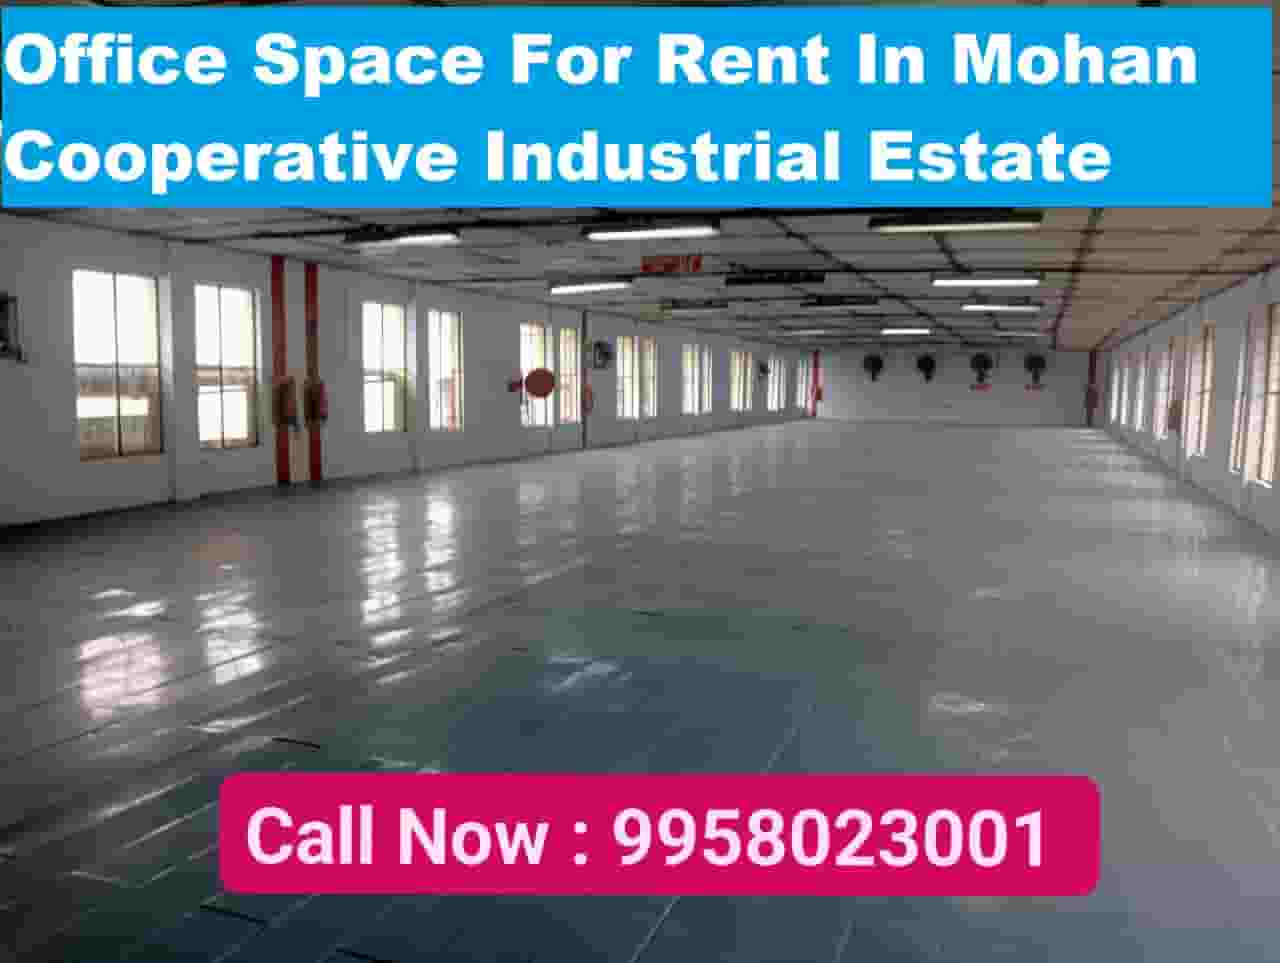 Office space for rent in Mohan Cooperative Industrial Estate